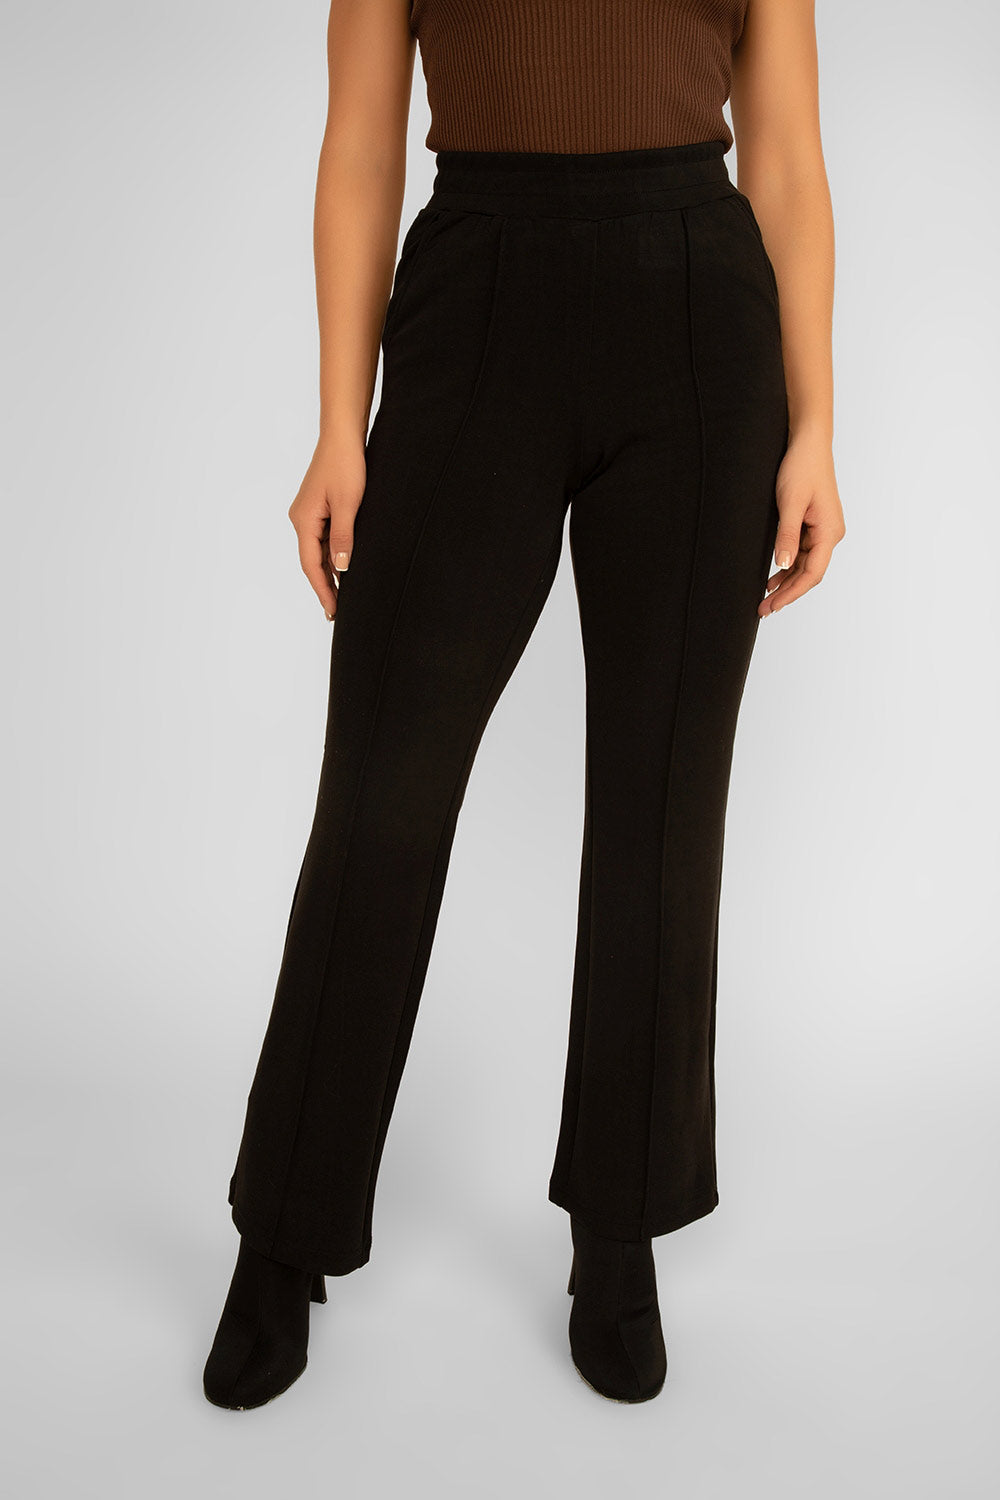 Women's Clothing ESQUALO (F2305504) Flare Modal Trousers in BLACK